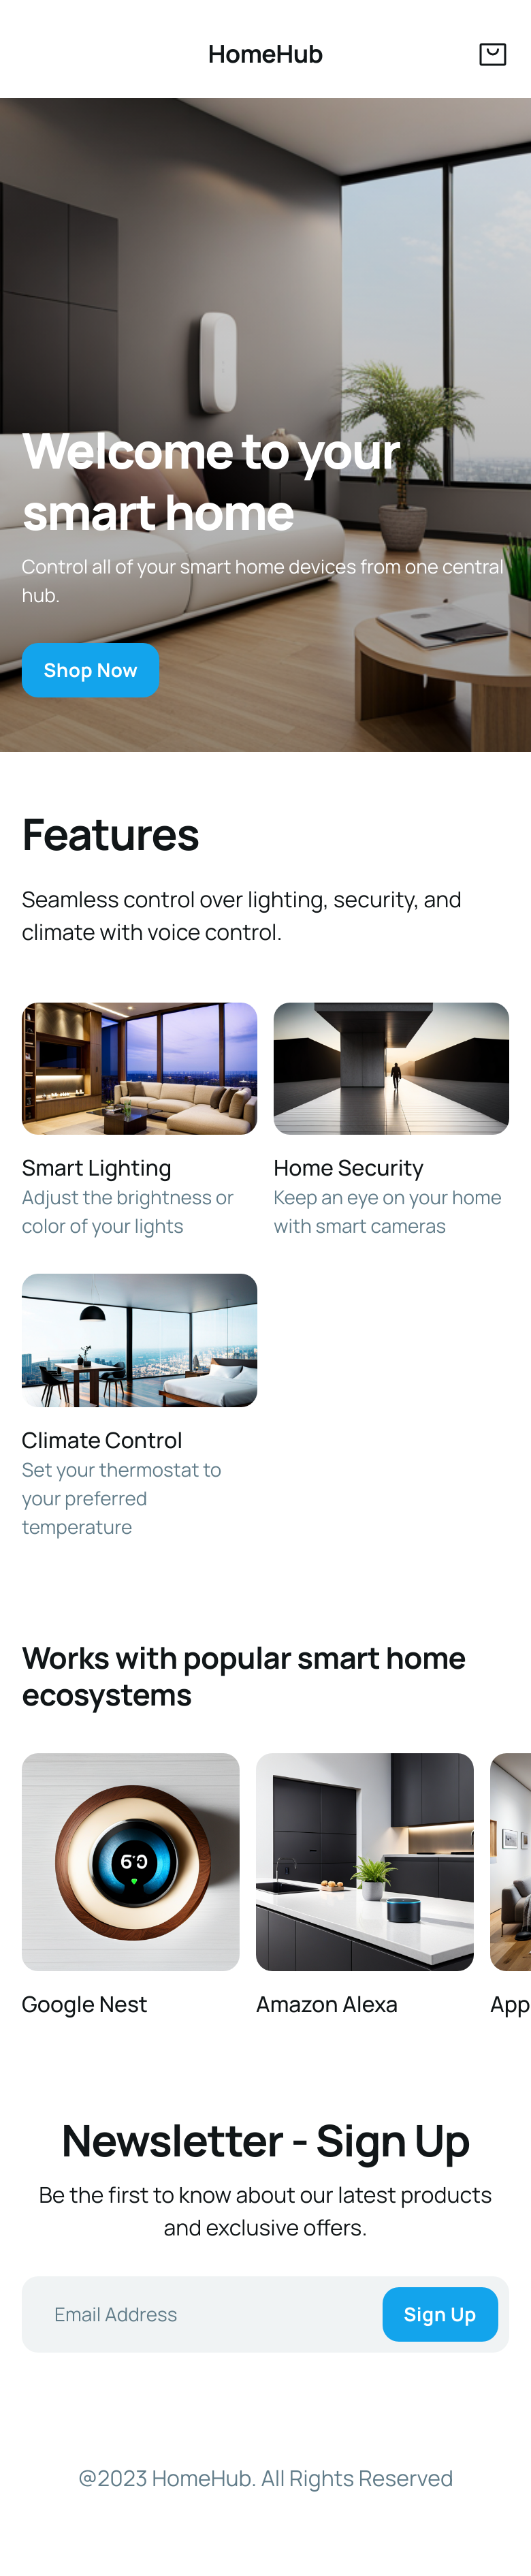 Design a landing page for "HomeHub," an innovative smart home device that centralizes control over various household functions. The product seamlessly integrates with smart lighting, security systems, and home appliances. The landing page should exude modernity and sophistication, with a clean layout and a color palette that complements contemporary home aesthetics. Emphasize the device's intuitive user interface, showcasing its ability to simplify home management. Use high-quality visuals to highlight key features such as voice control, energy efficiency, and compatibility with popular smart home ecosystems.